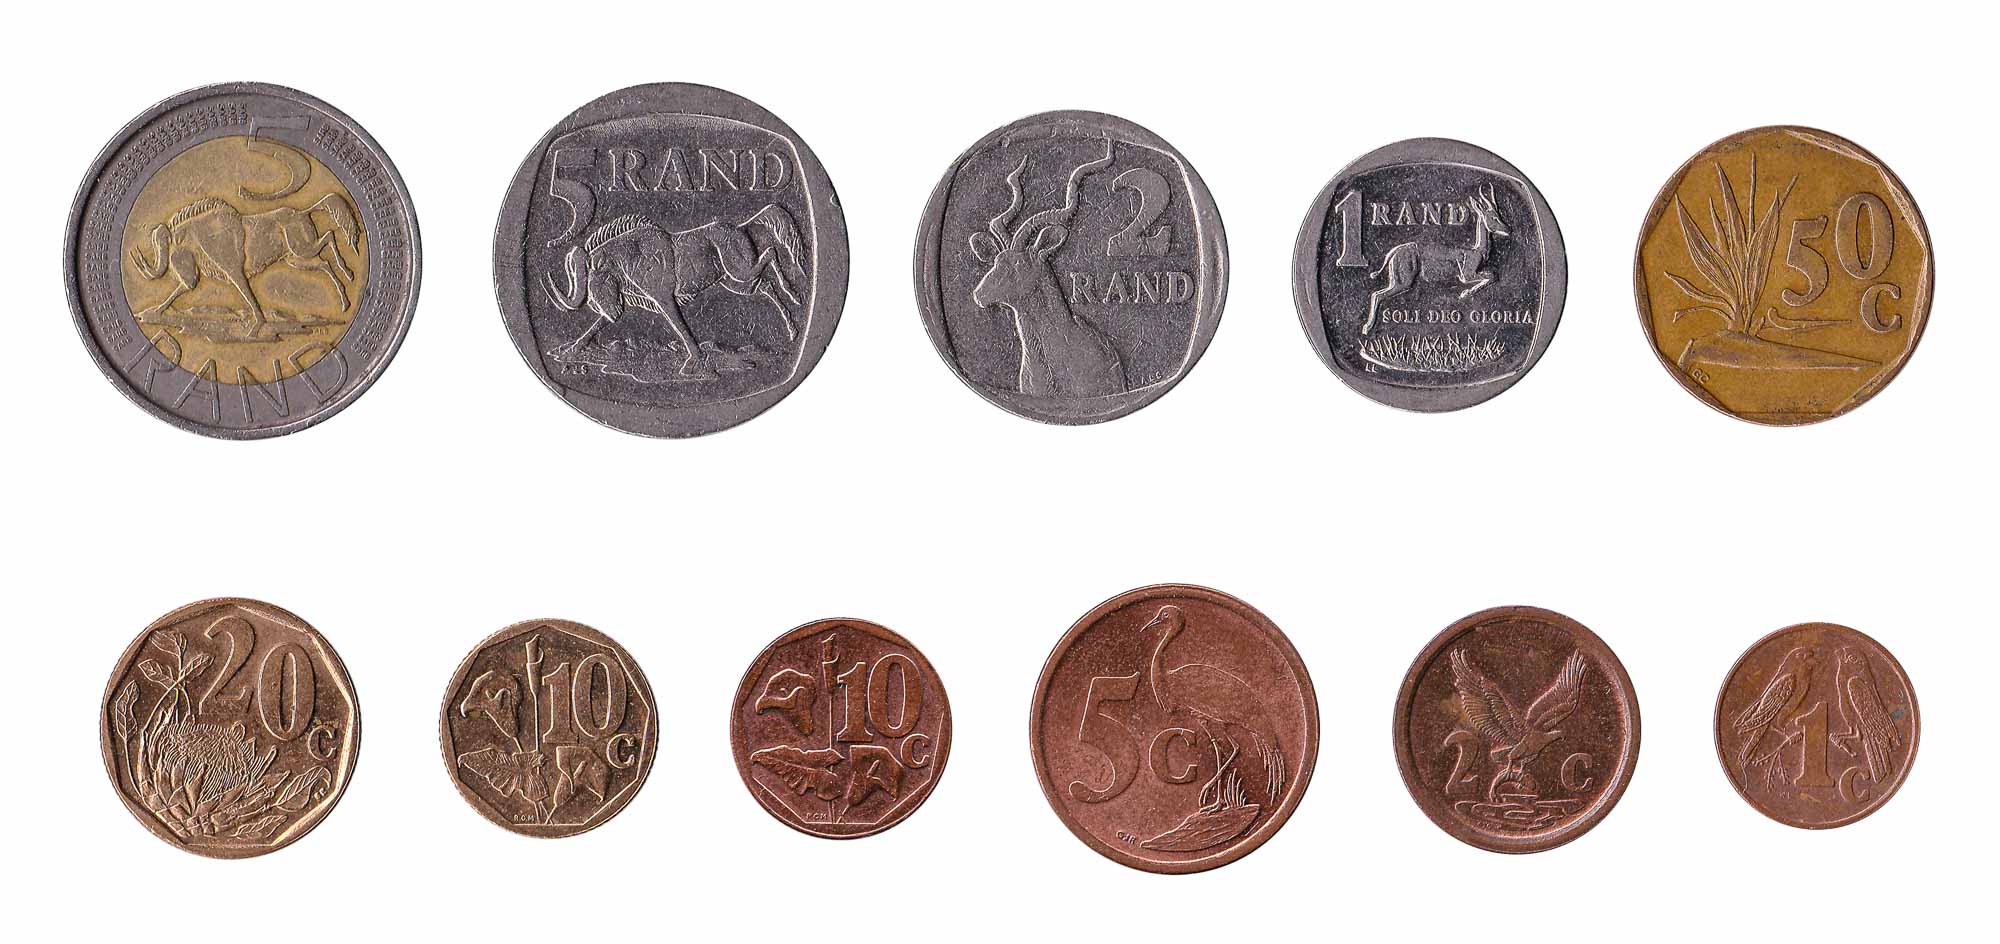 South African rand coins